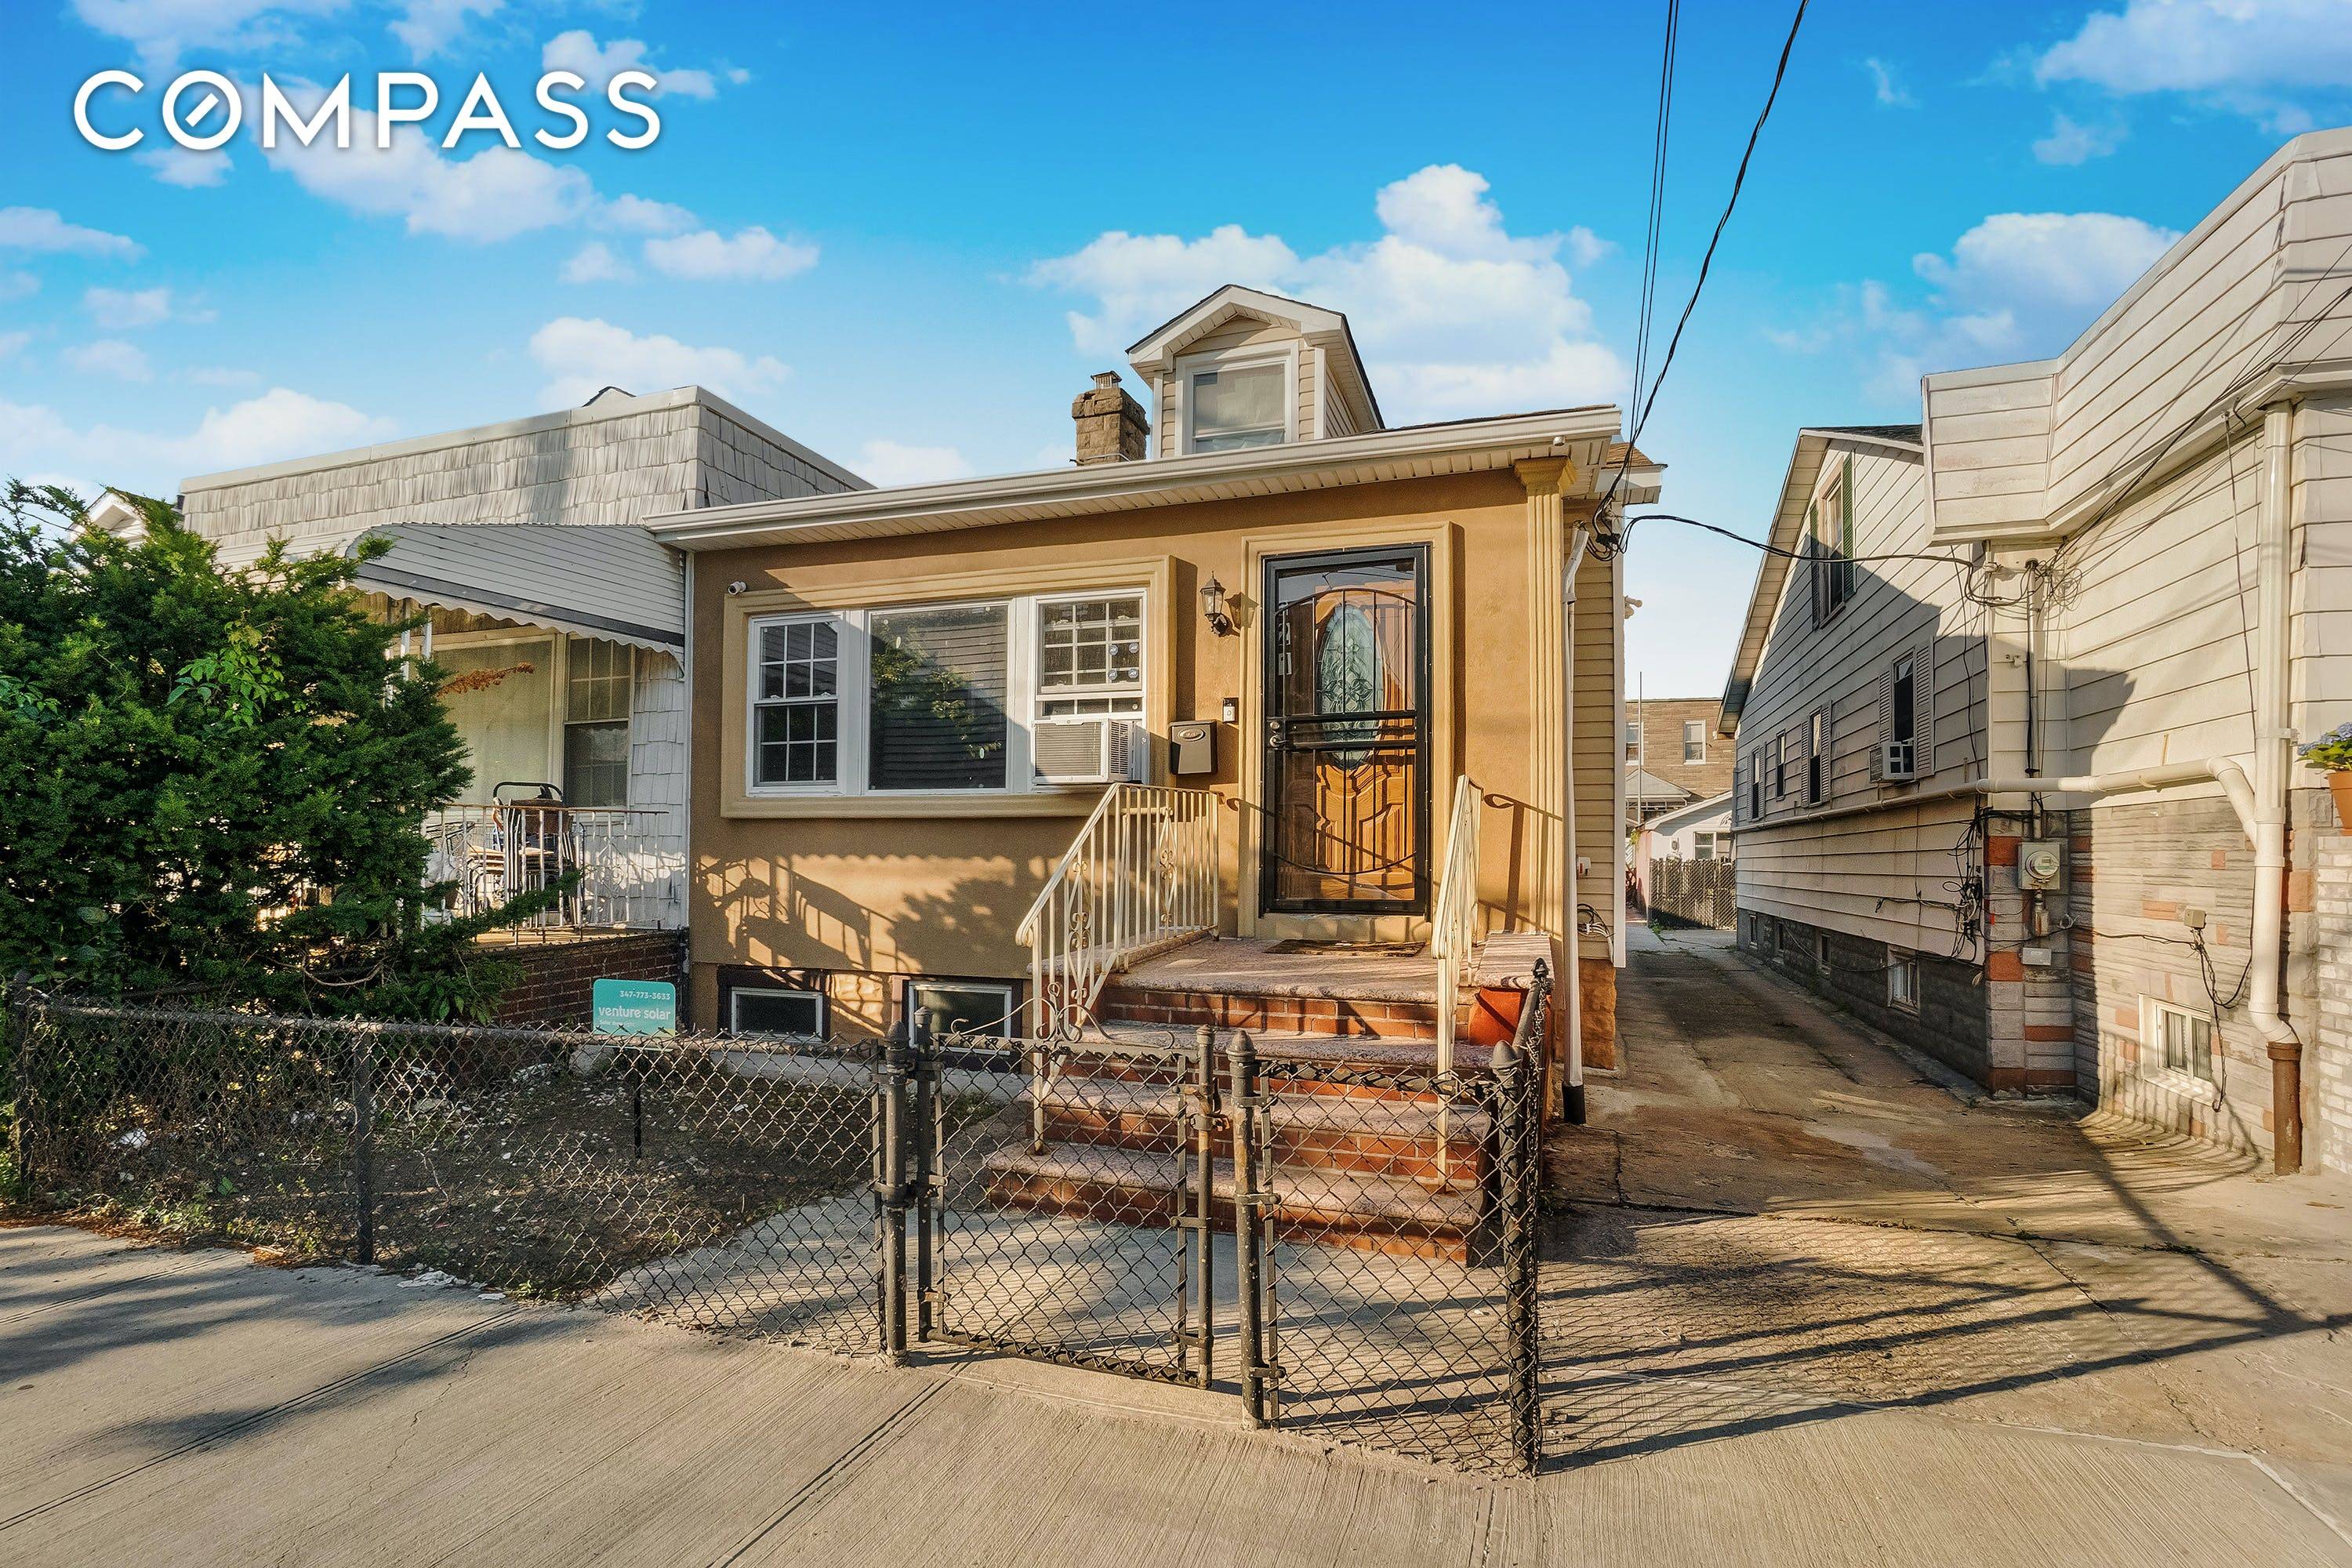 Welcome home, this totally renovated single family home has just hit the market.